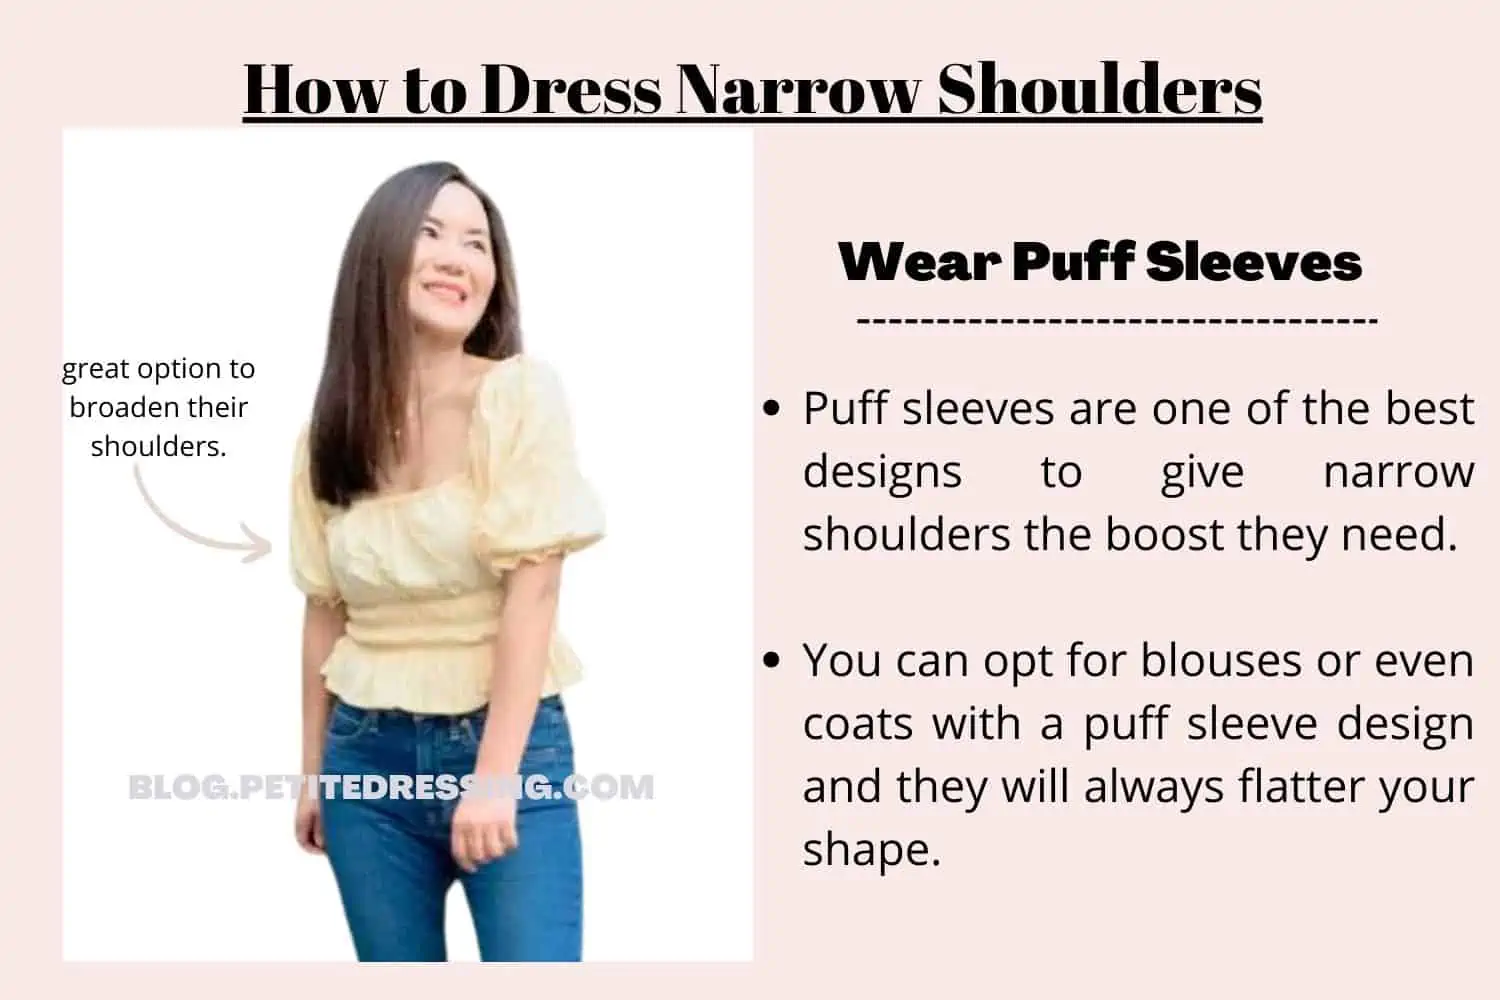 Tip: The Cure for Narrow Shoulders